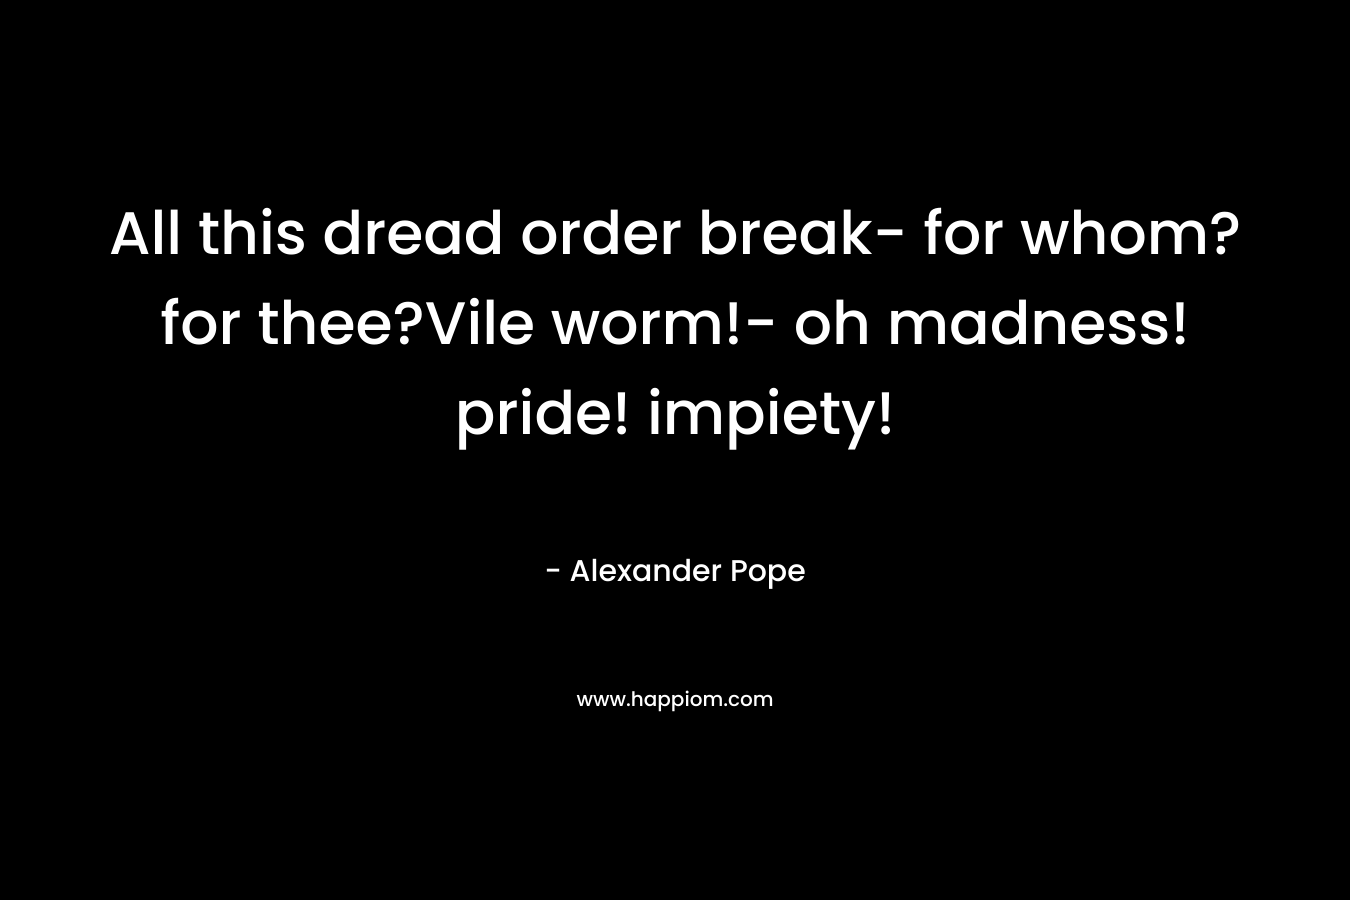 All this dread order break- for whom? for thee?Vile worm!- oh madness! pride! impiety!